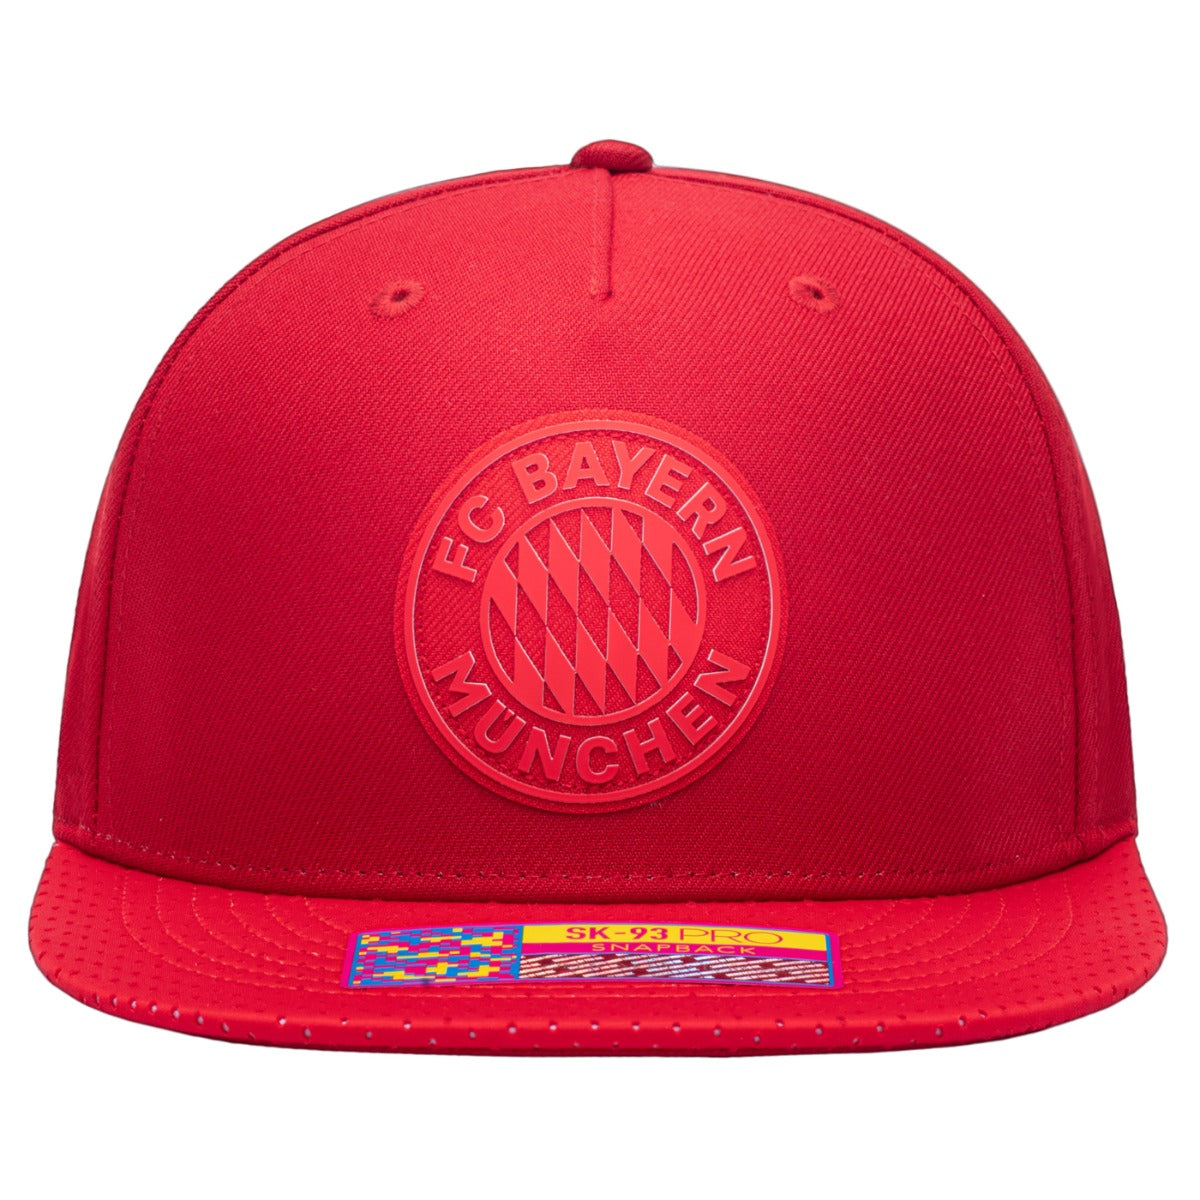 FI Collection Bayern Munich Elite Snapback Hat - Red (Front)